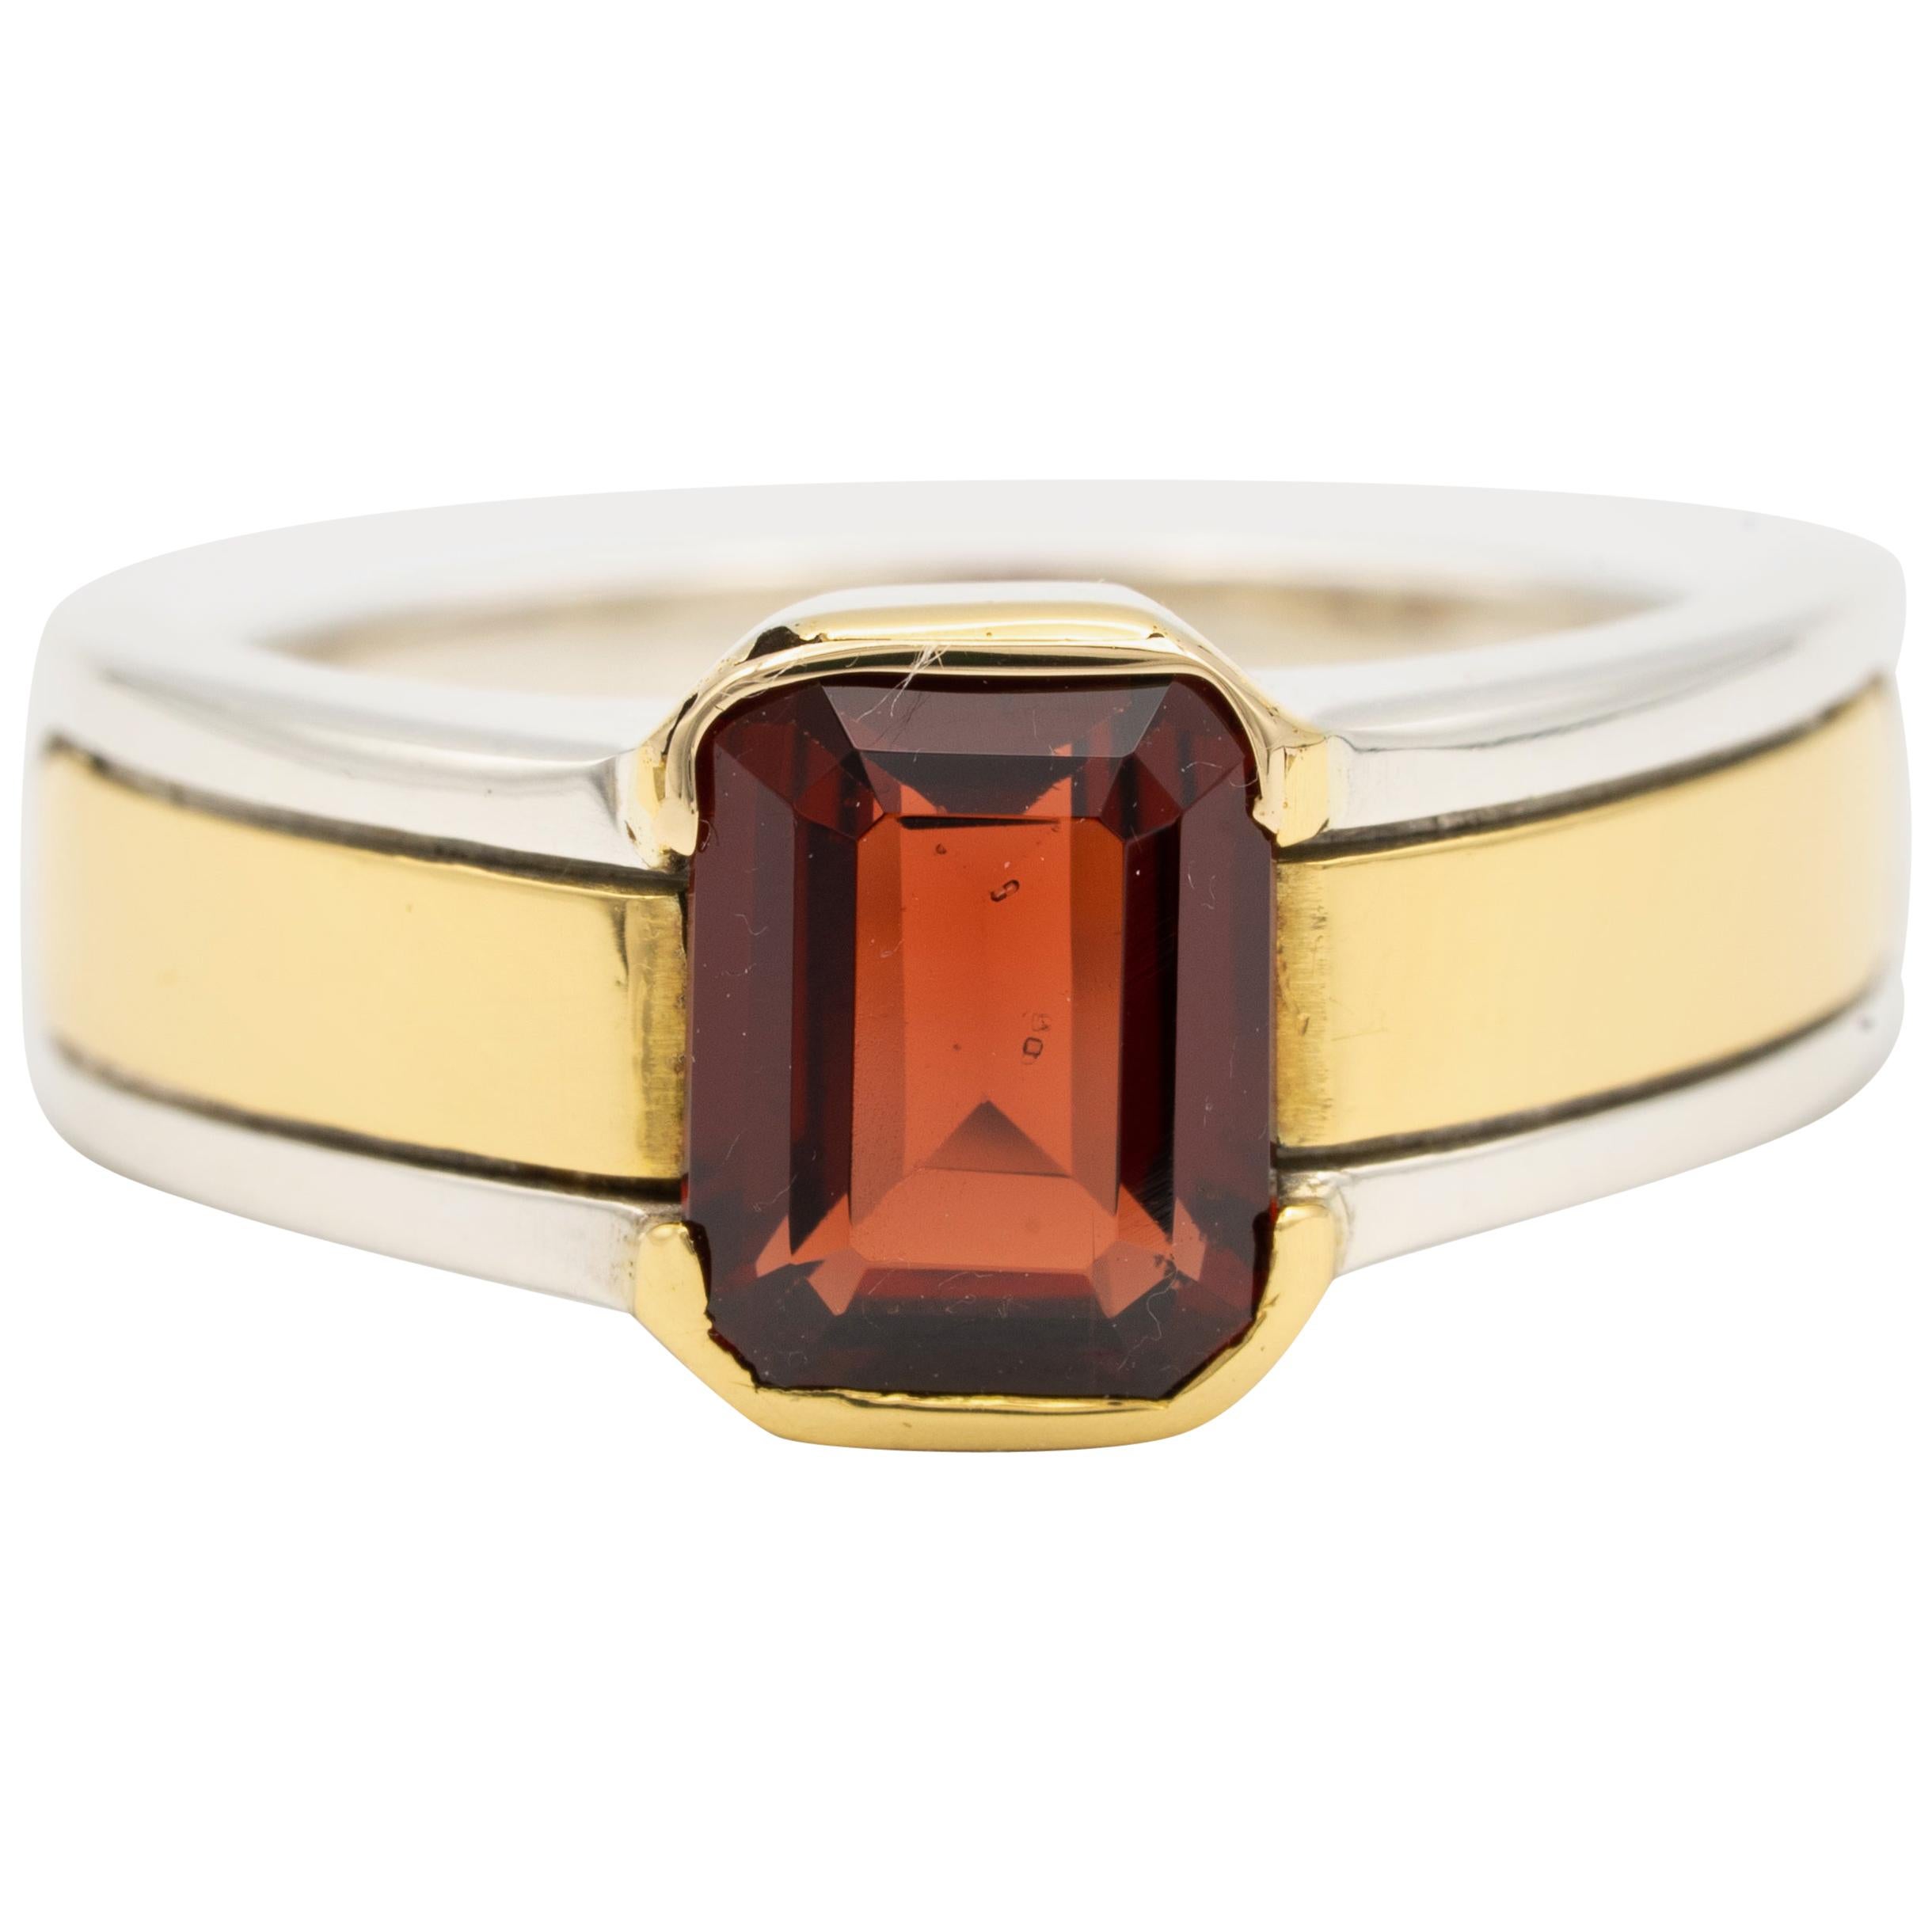 Cartier Garnet Ring in Two-Tone Silver and 18 Karat Gold